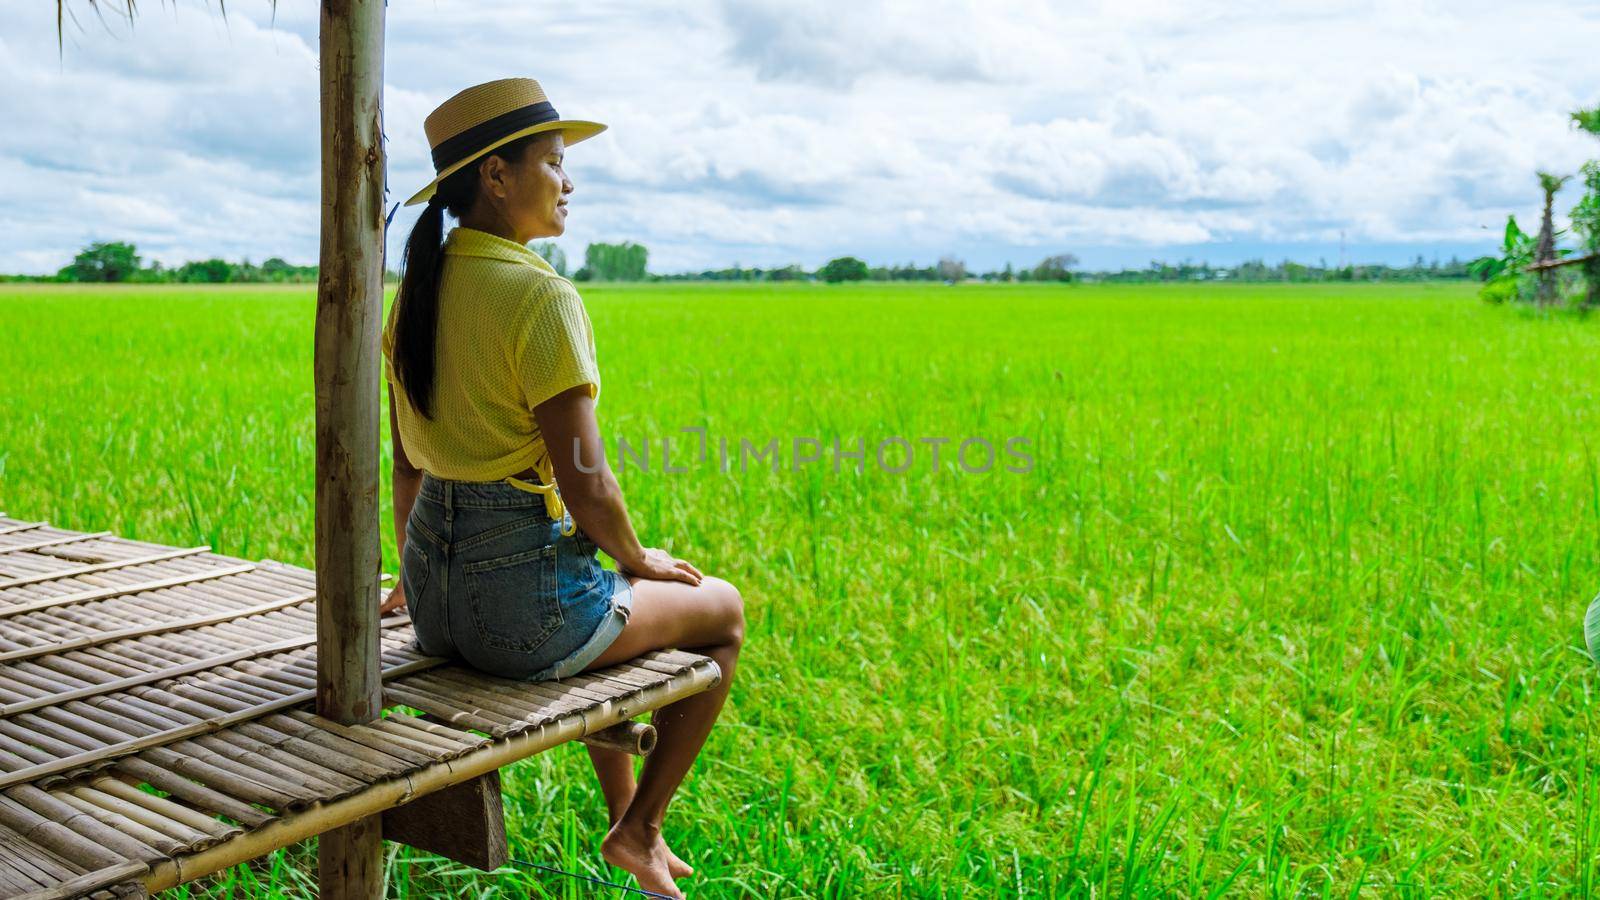 Eco farm homestay with a rice field in central Thailand, paddy field of rice during rain monsoon season in Thailand. Asian woman at an homestay farm in Thailand